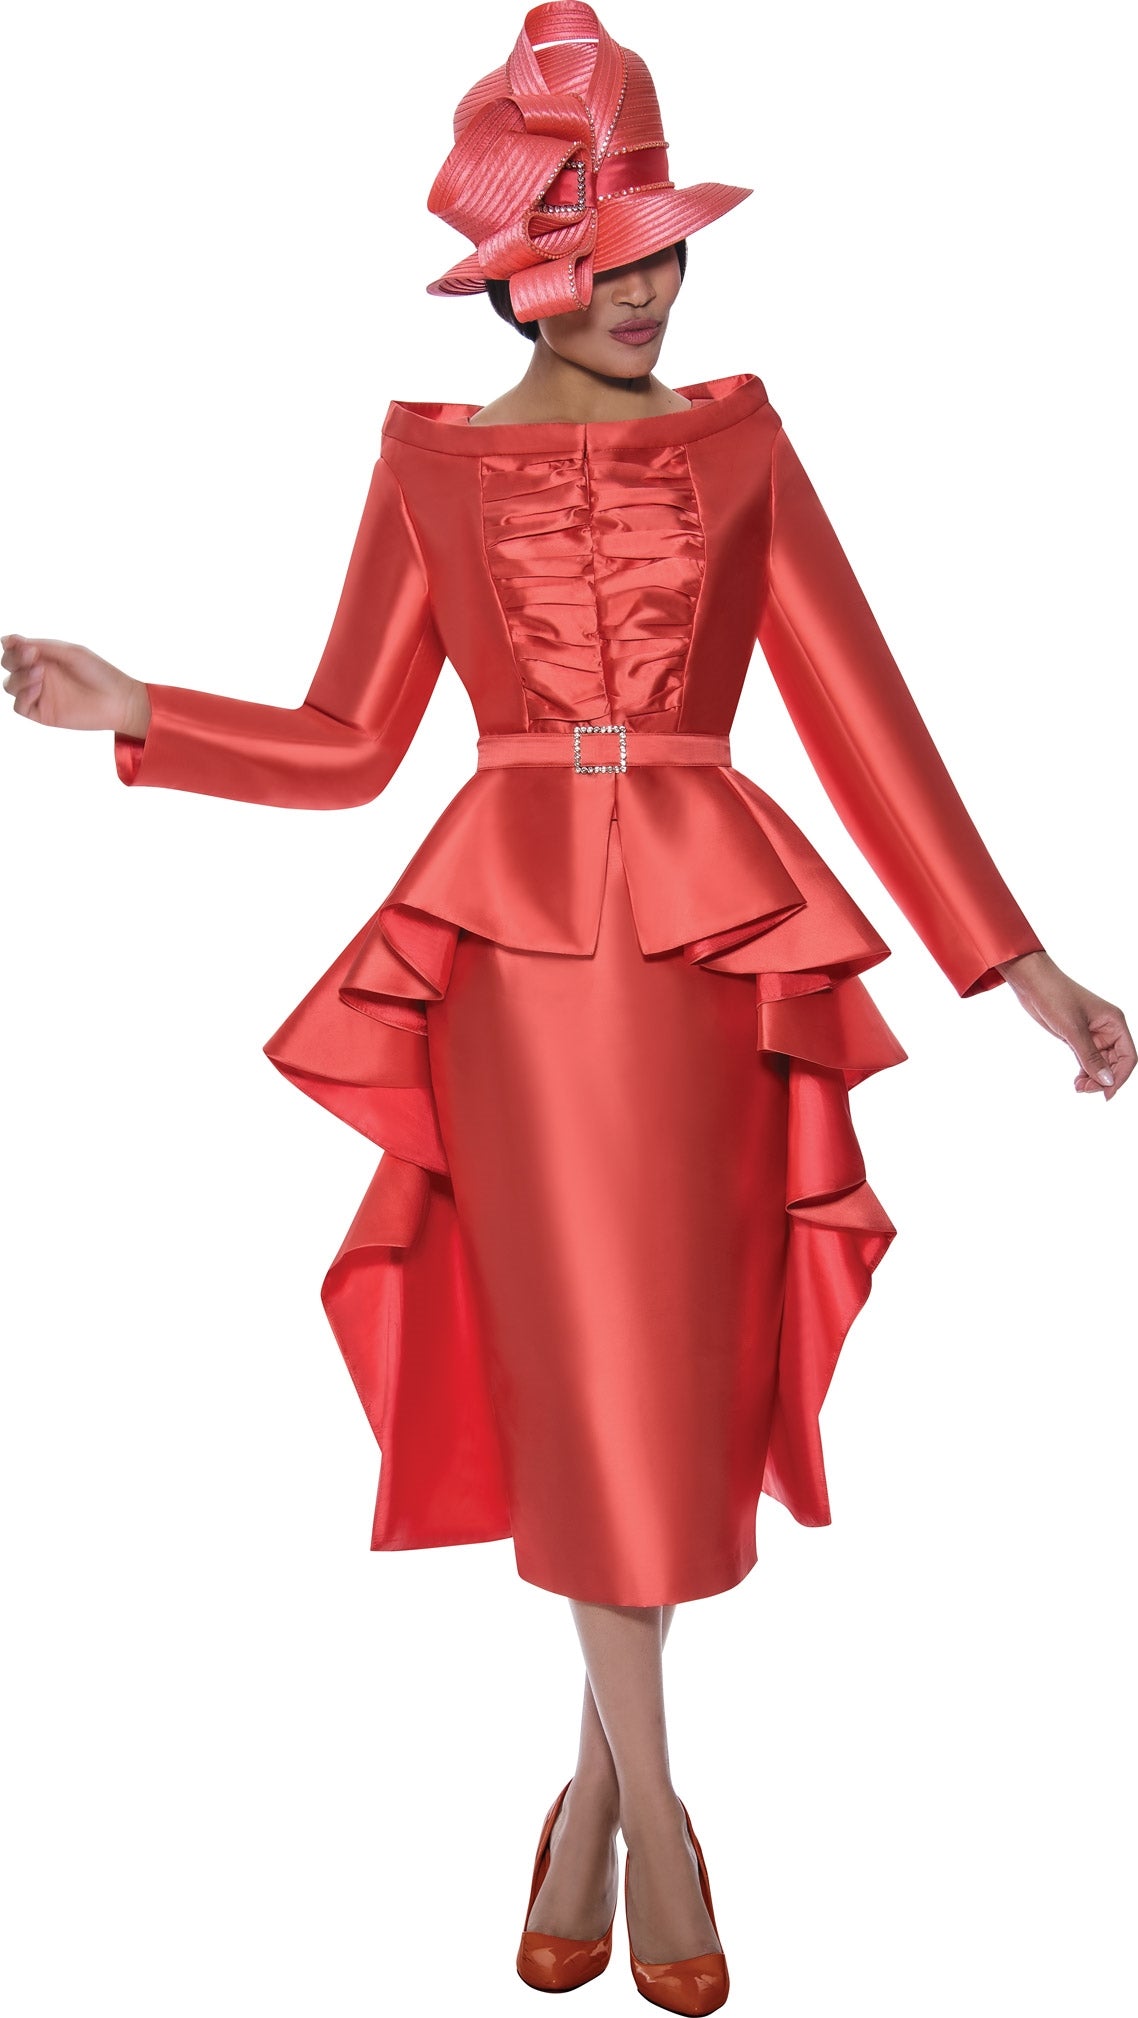 GMI Church Suit 9632-Coral - Church Suits For Less